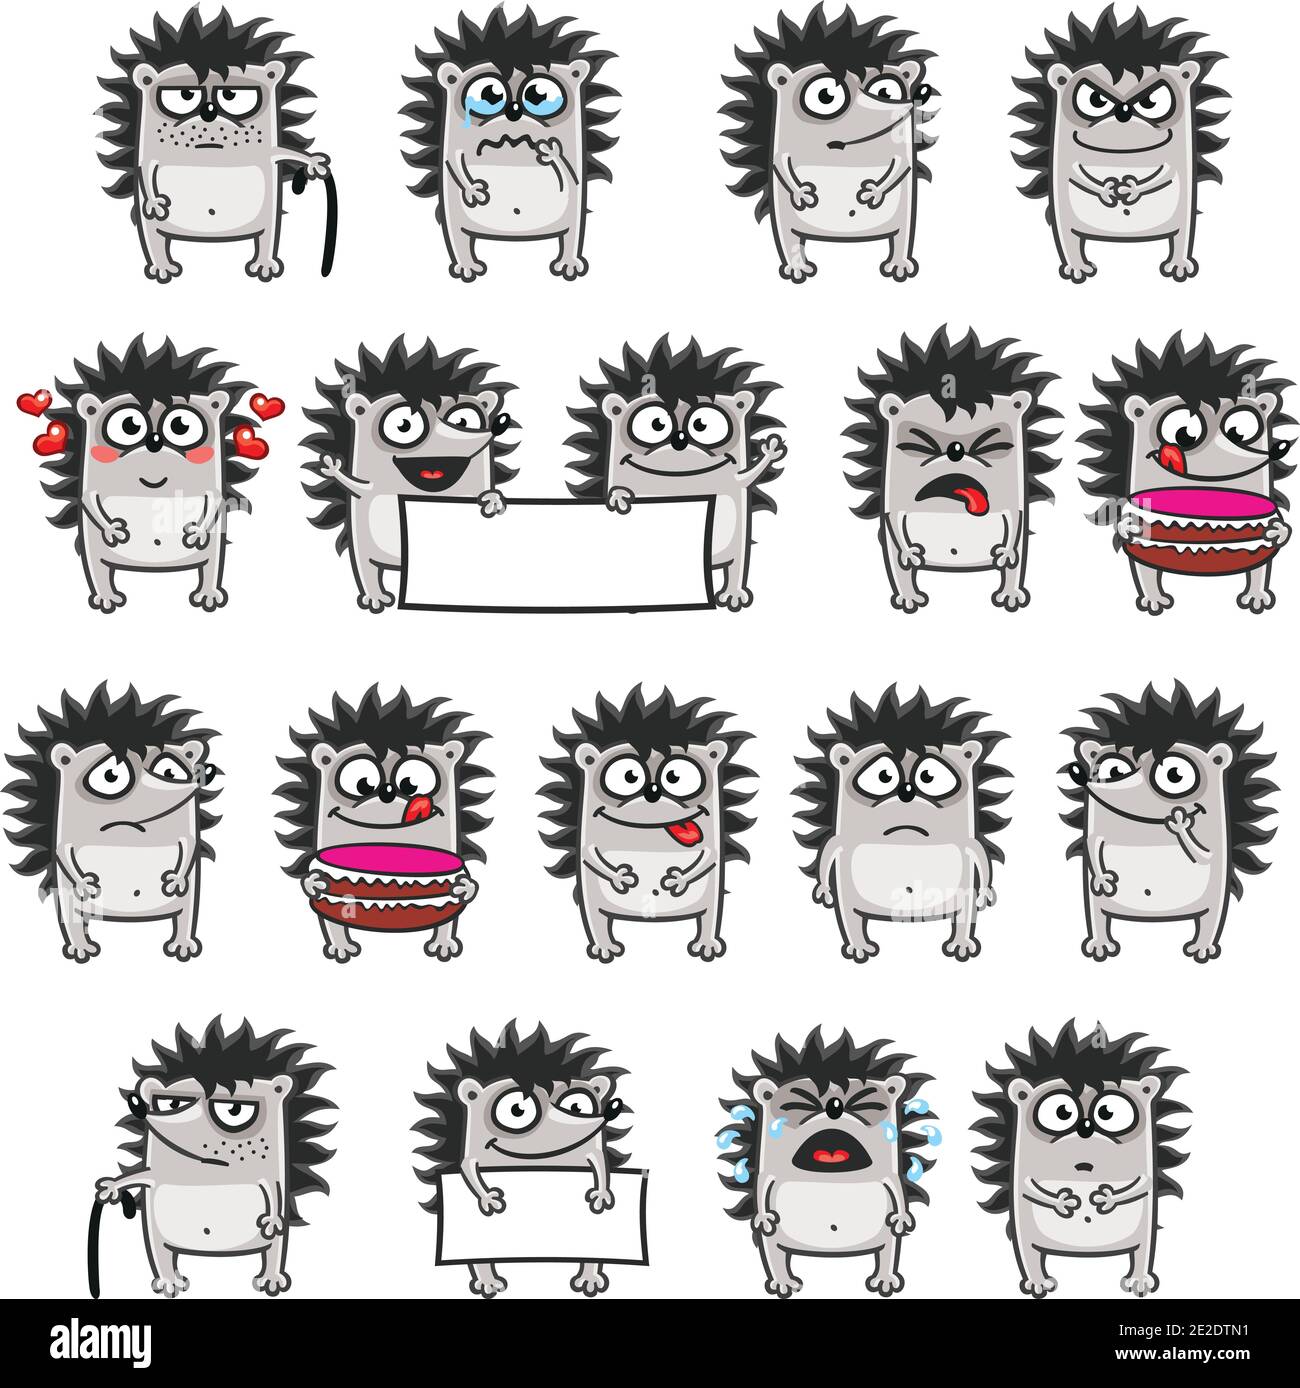 18 smiley hedgehogs individually grouped for easy copy-n-paste.(3) Stock Vector